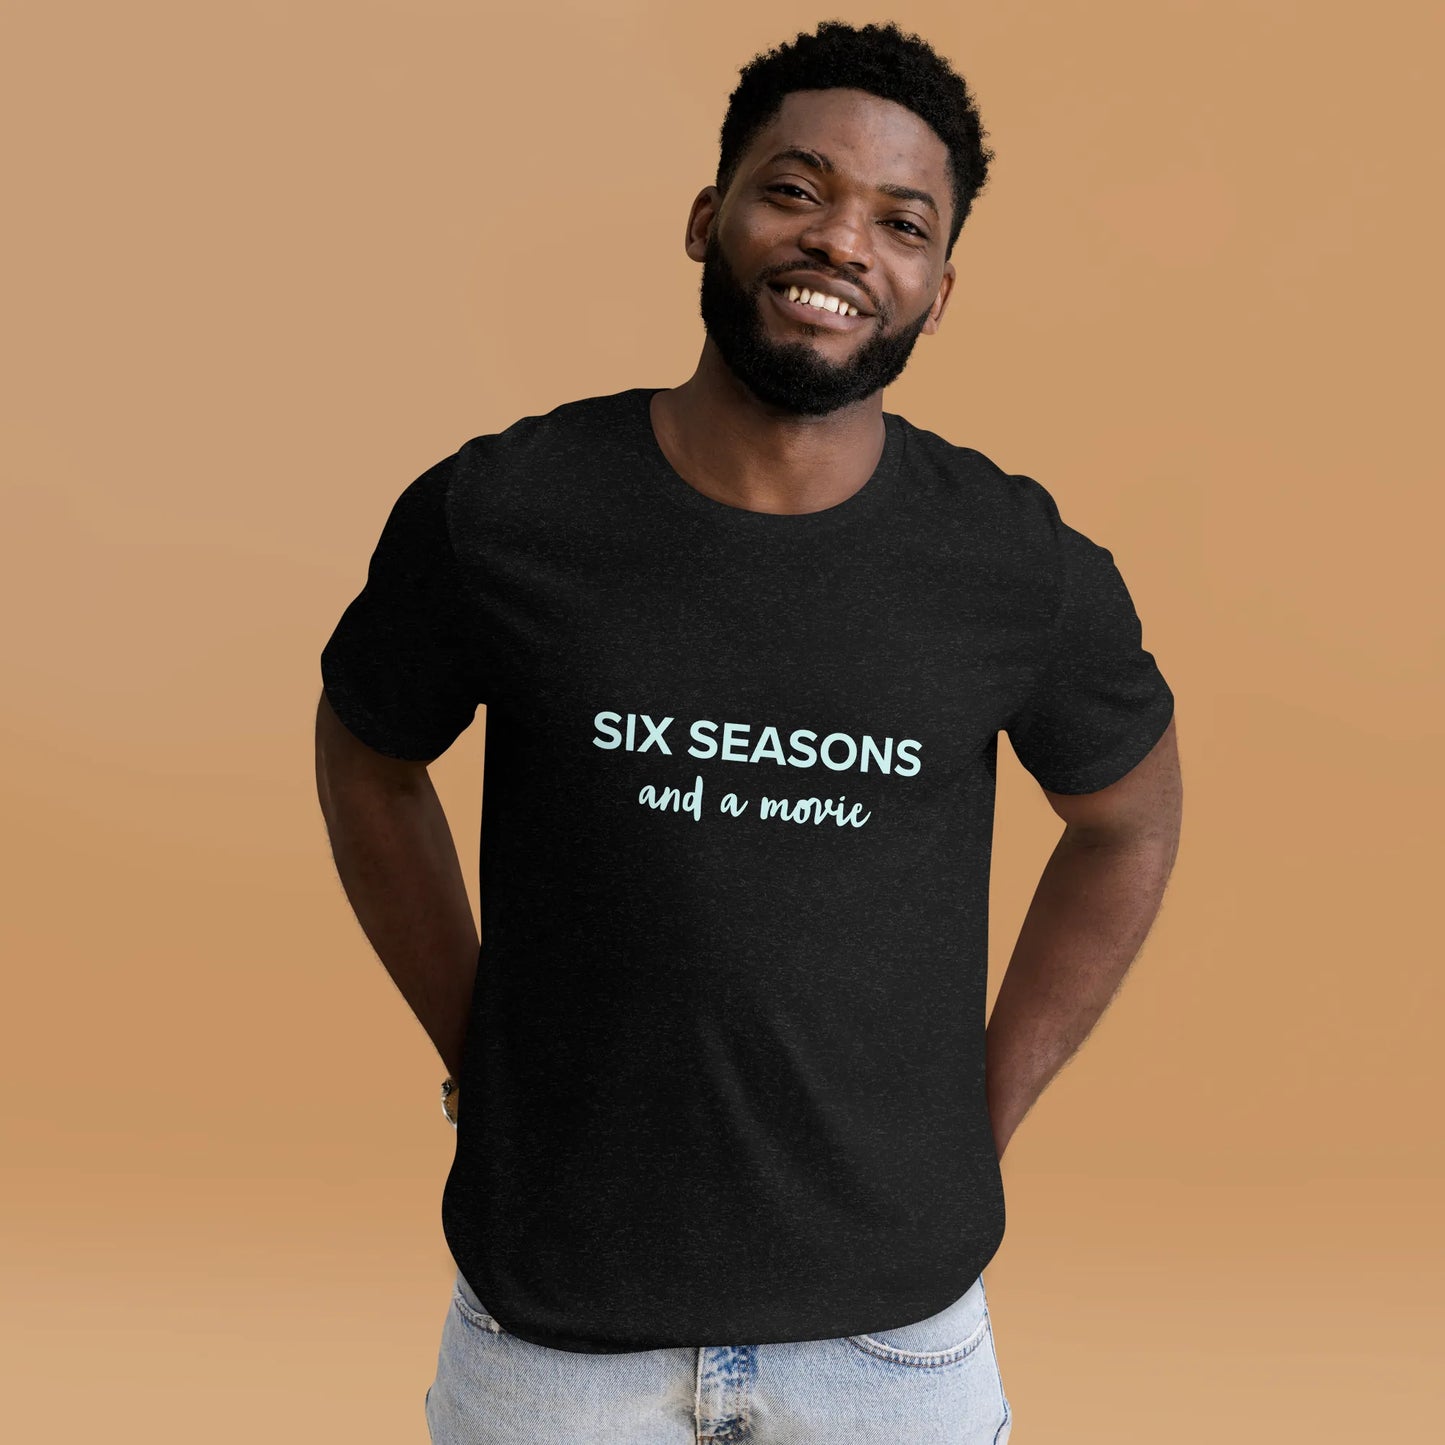 Six Seasons and a Movie Tee in Black on man